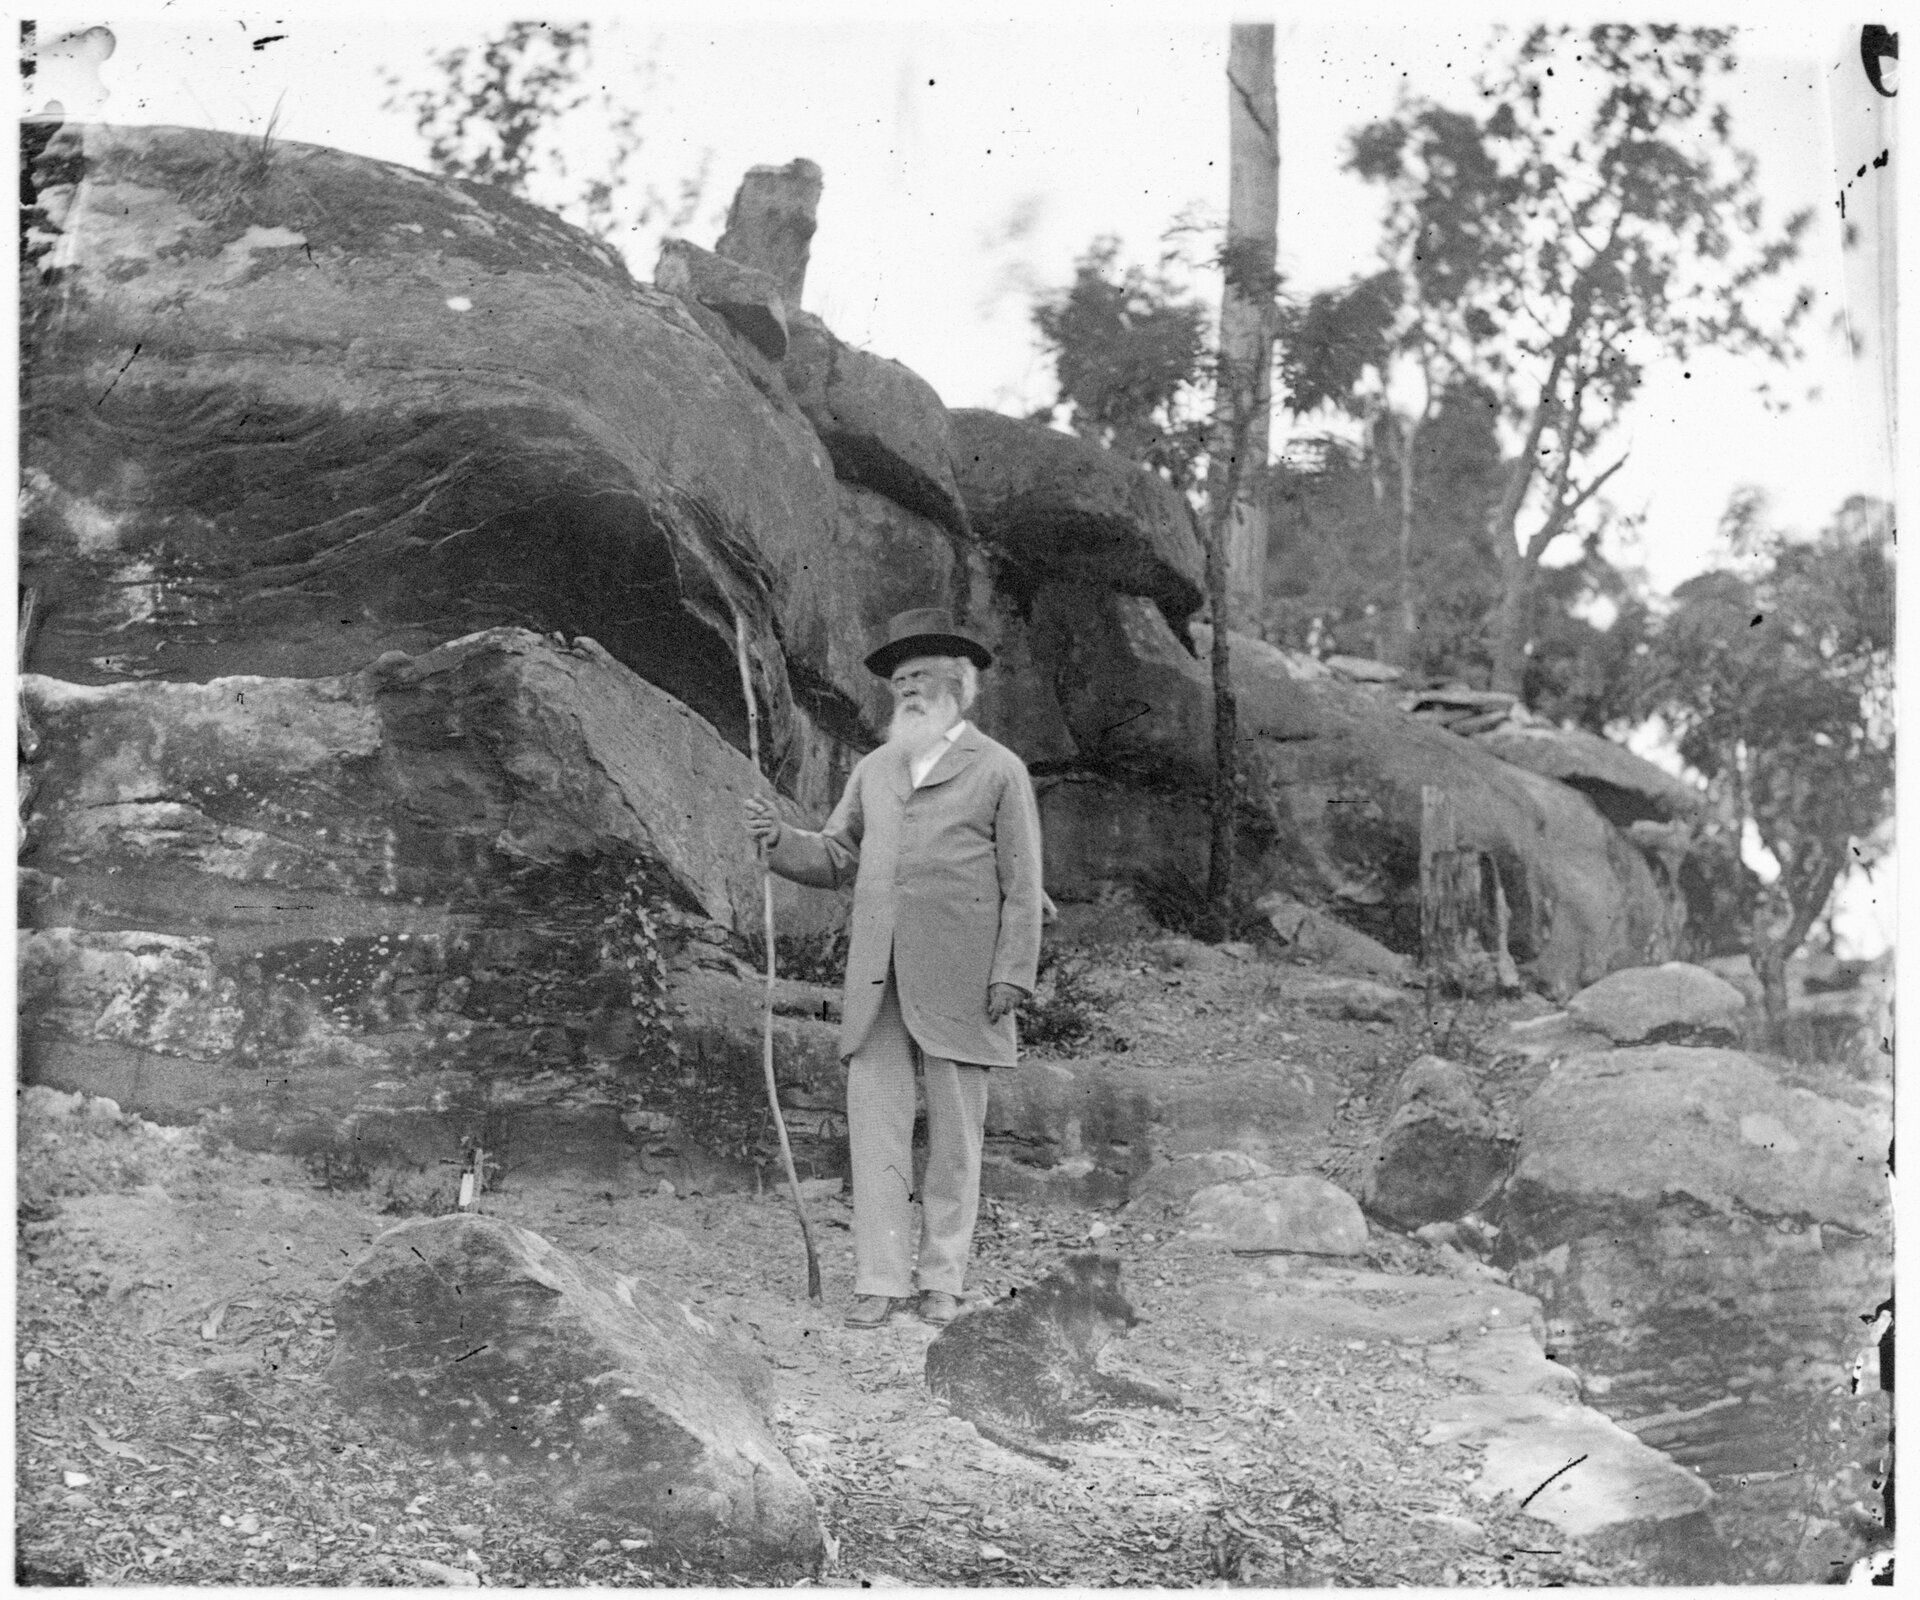 A man in a suit with a white beard stands on rocky bushland holding a tall walking stick